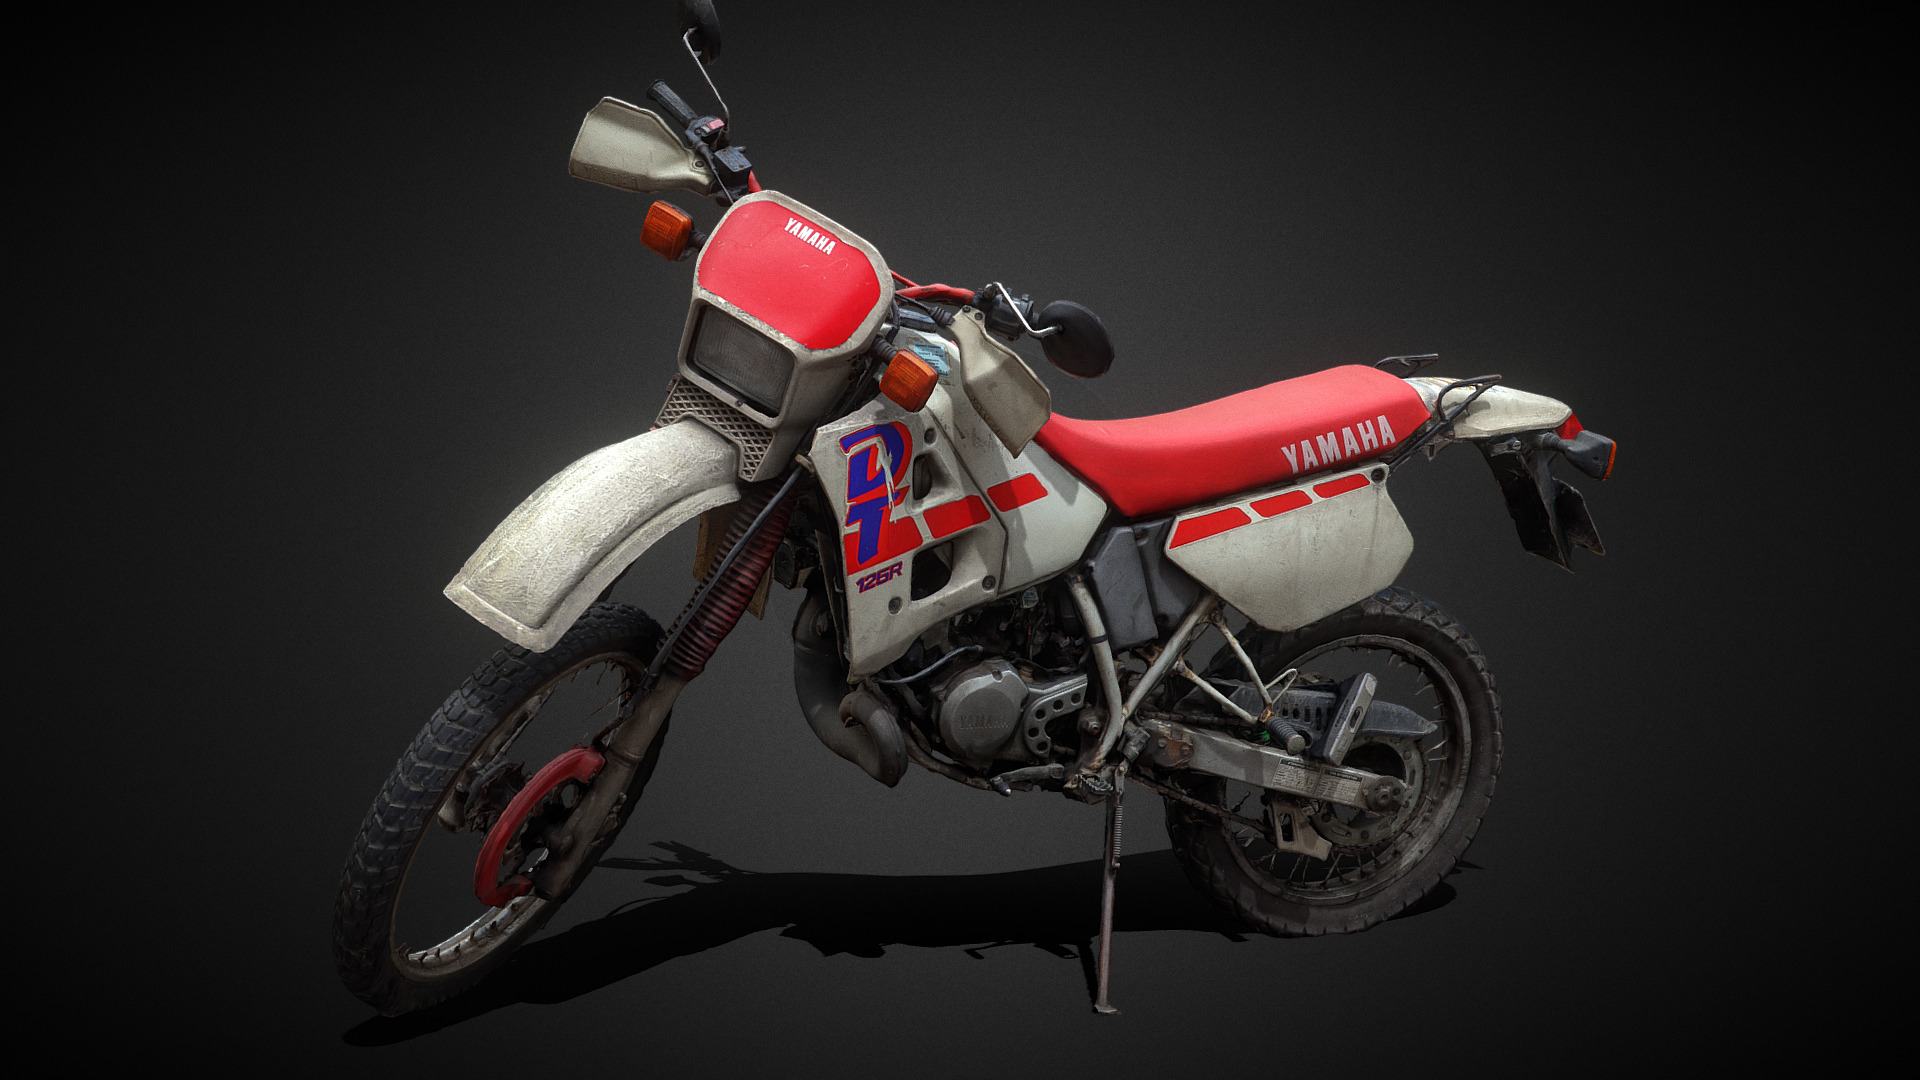 3D model YAMAHA DT 125 R - This is a 3D model of the YAMAHA DT 125 R. The 3D model is about a red and white motorcycle.